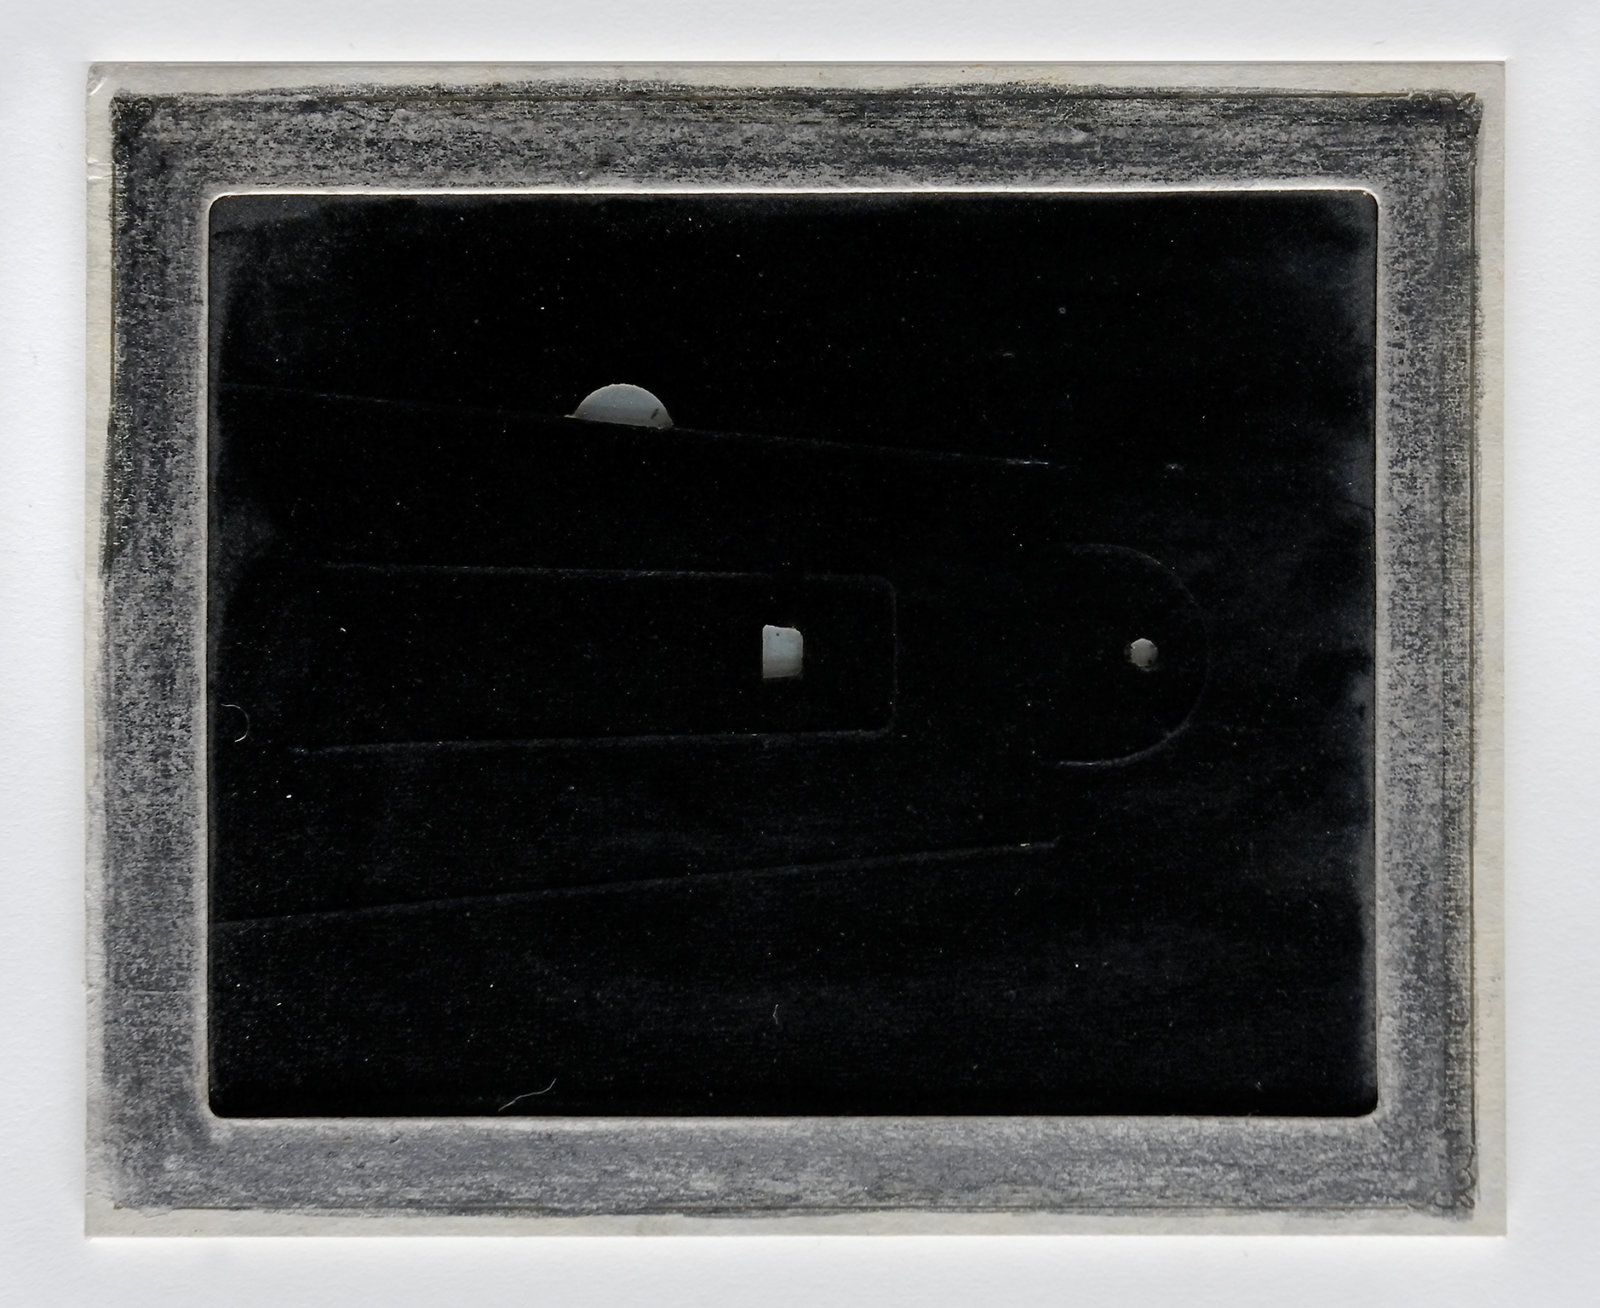 Jerry Pethick, Watching the Eclipse in the Shadow of the Tower, 1988, picture frame, glass, foil, graphite, 10 x 12 in. (24 x 29 cm)